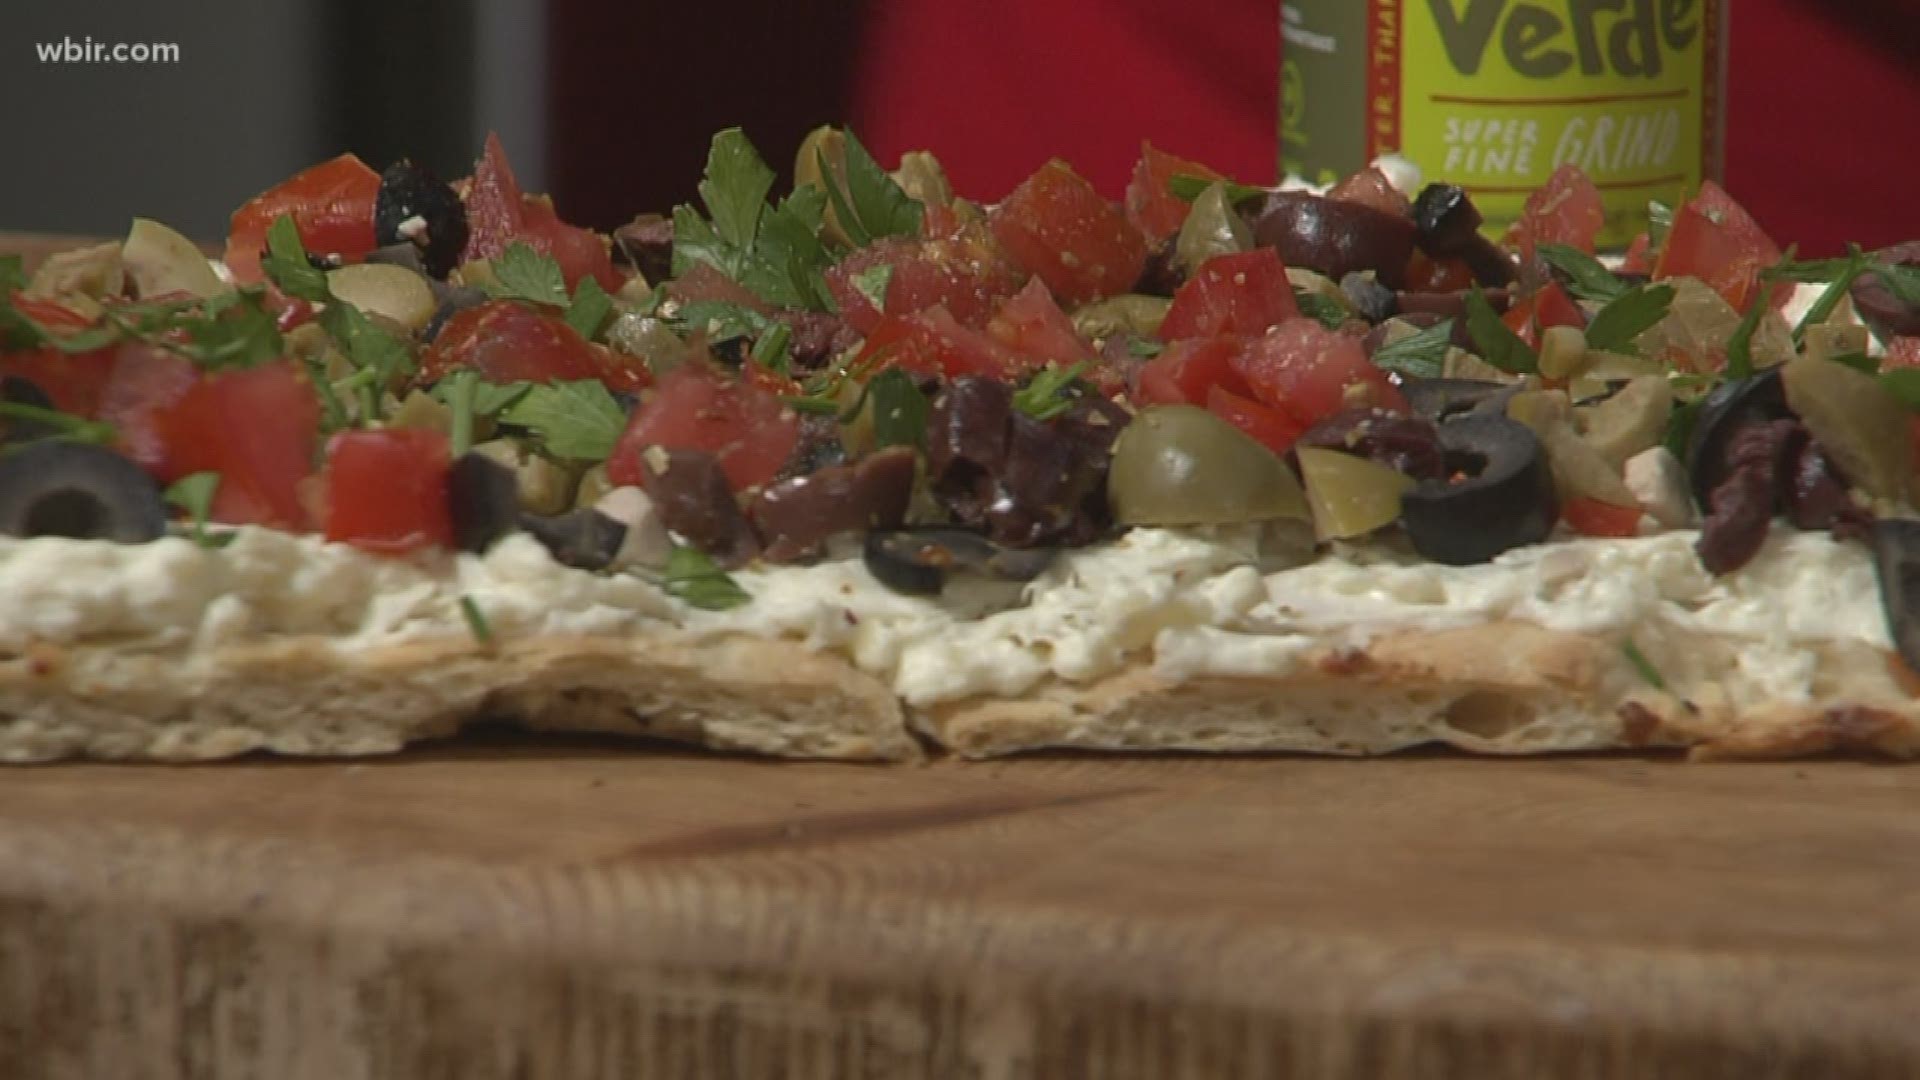 We are joined in the kitchen by Kim Wilcox from it's All So Yummy Cafe and Kim is going to show us how to make an olive pizza appetizer.